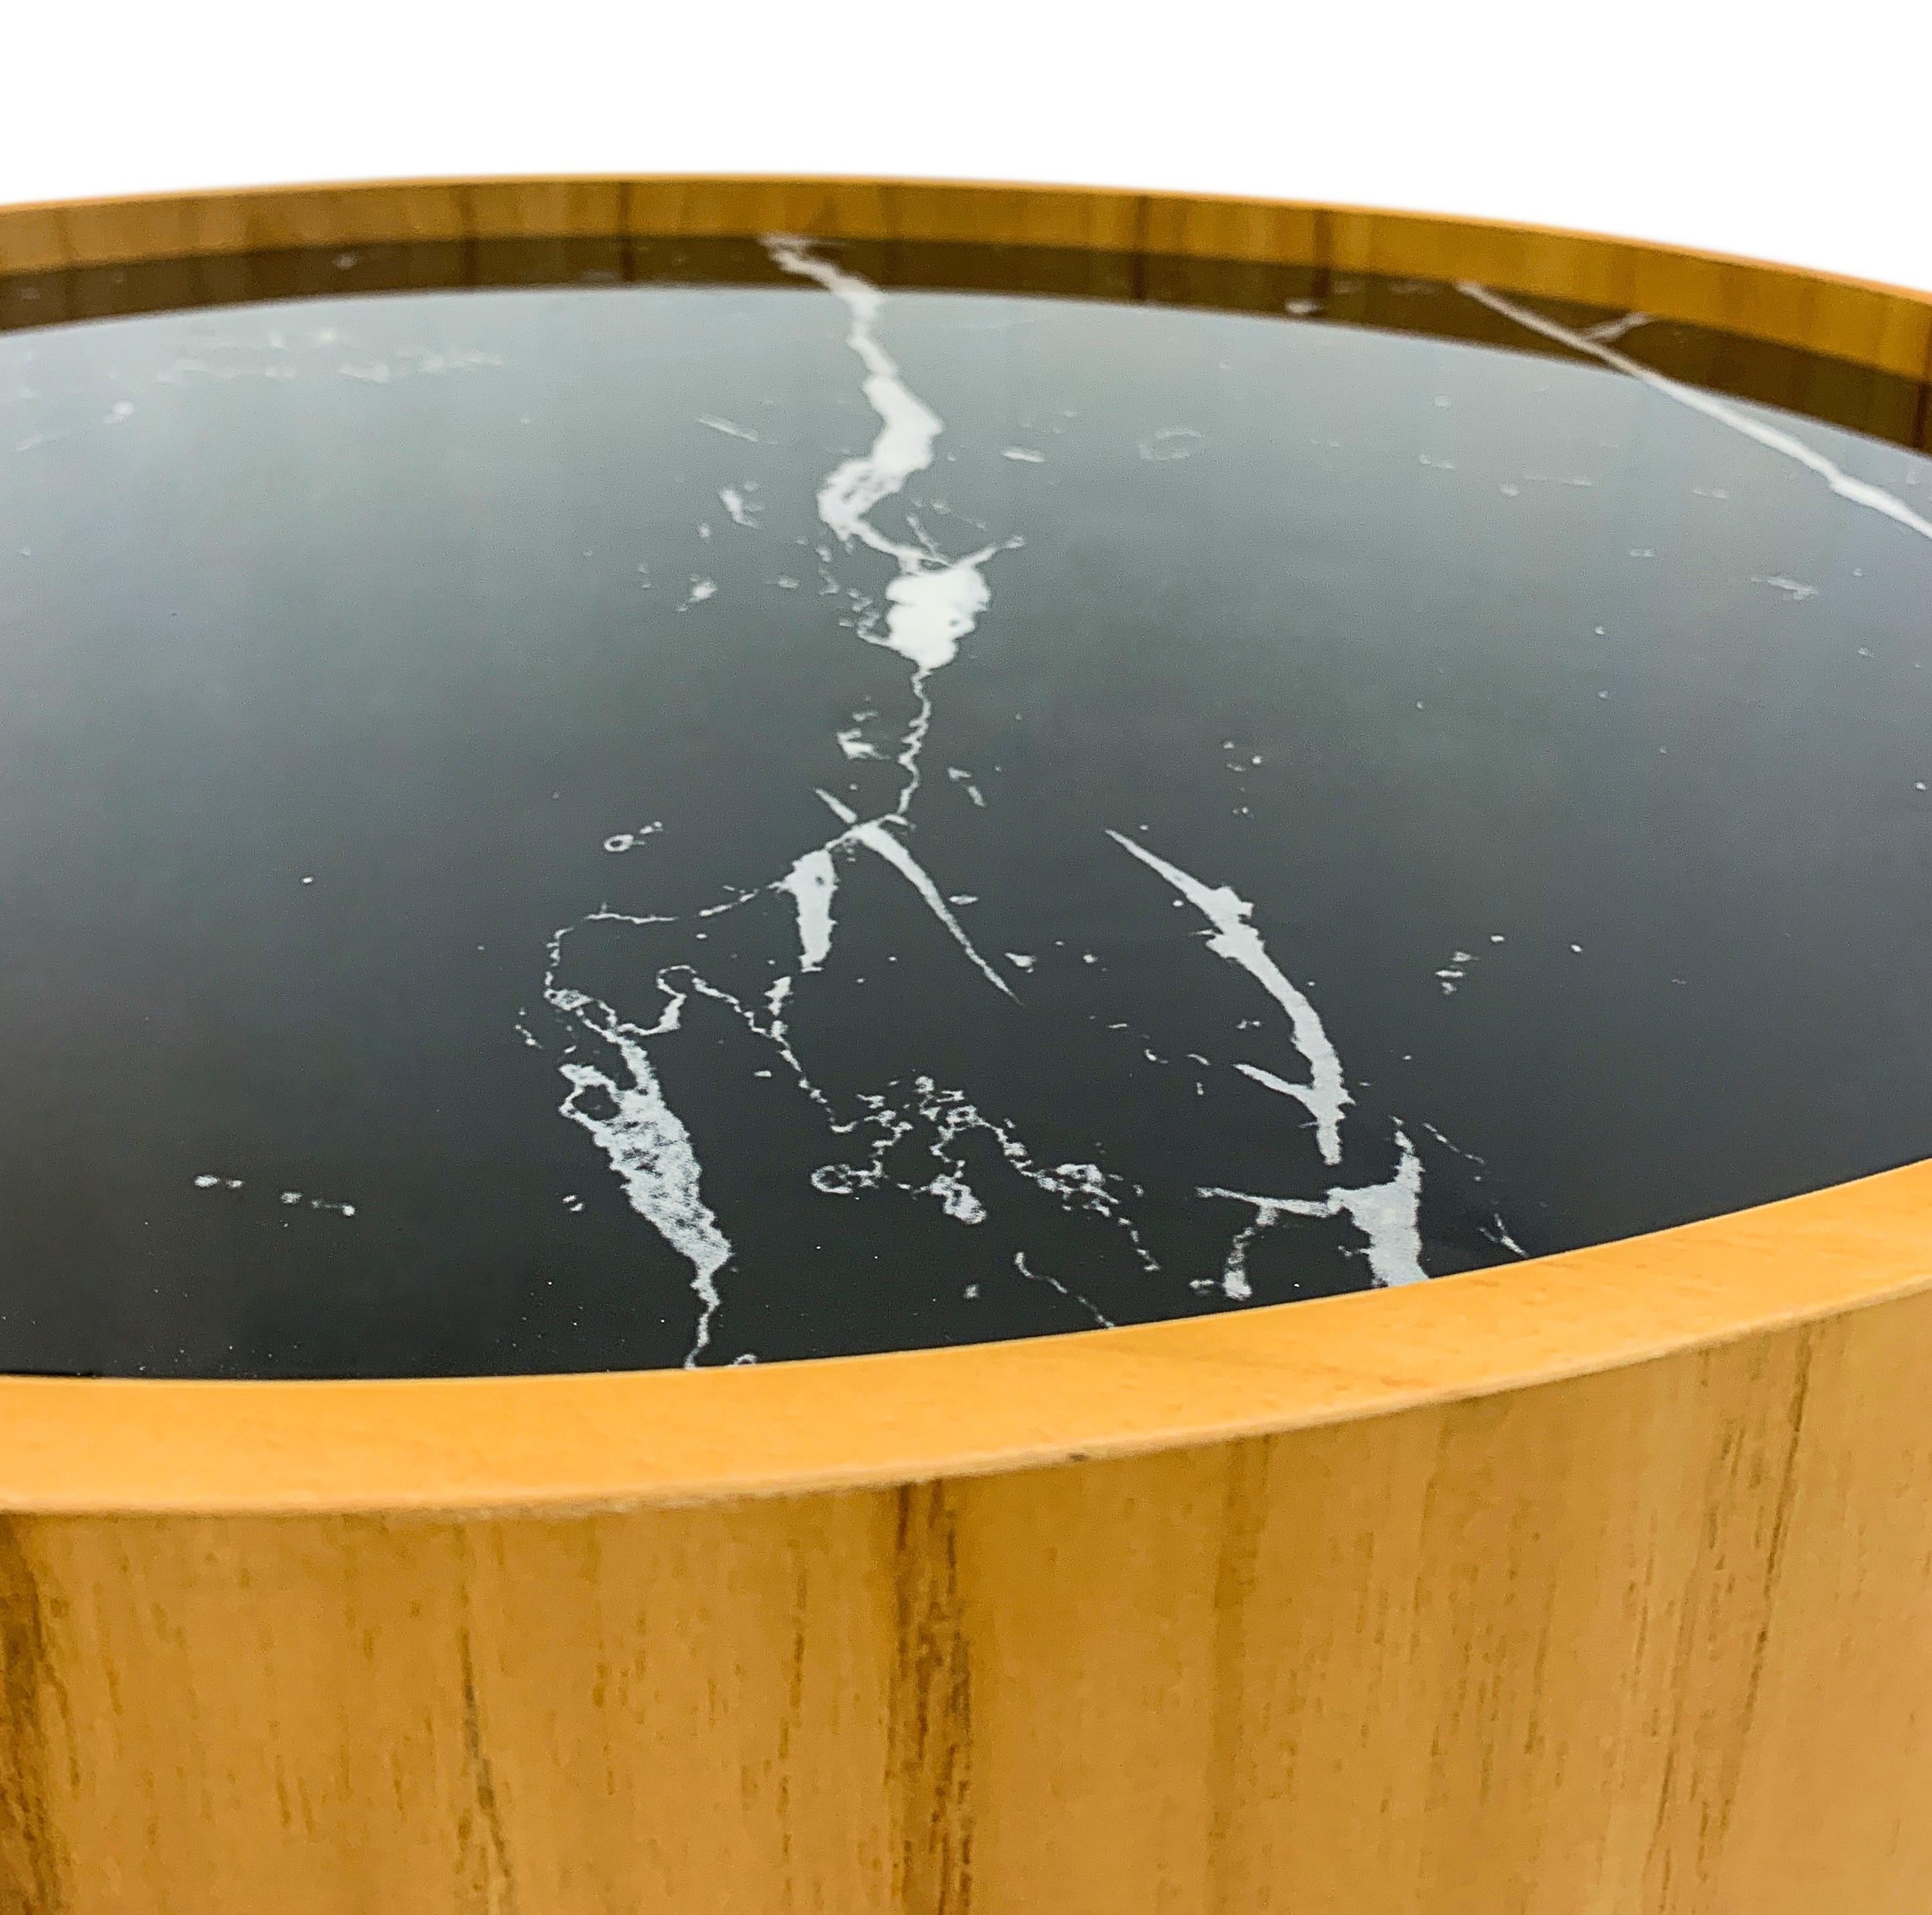 The stunning Regia occasional table consists of a tabletop in black Nero glass that imitates a beautiful black marble with white veins running through it. Combined with a Teak rim and stainless steel legs with a polished finish. The Regia table is